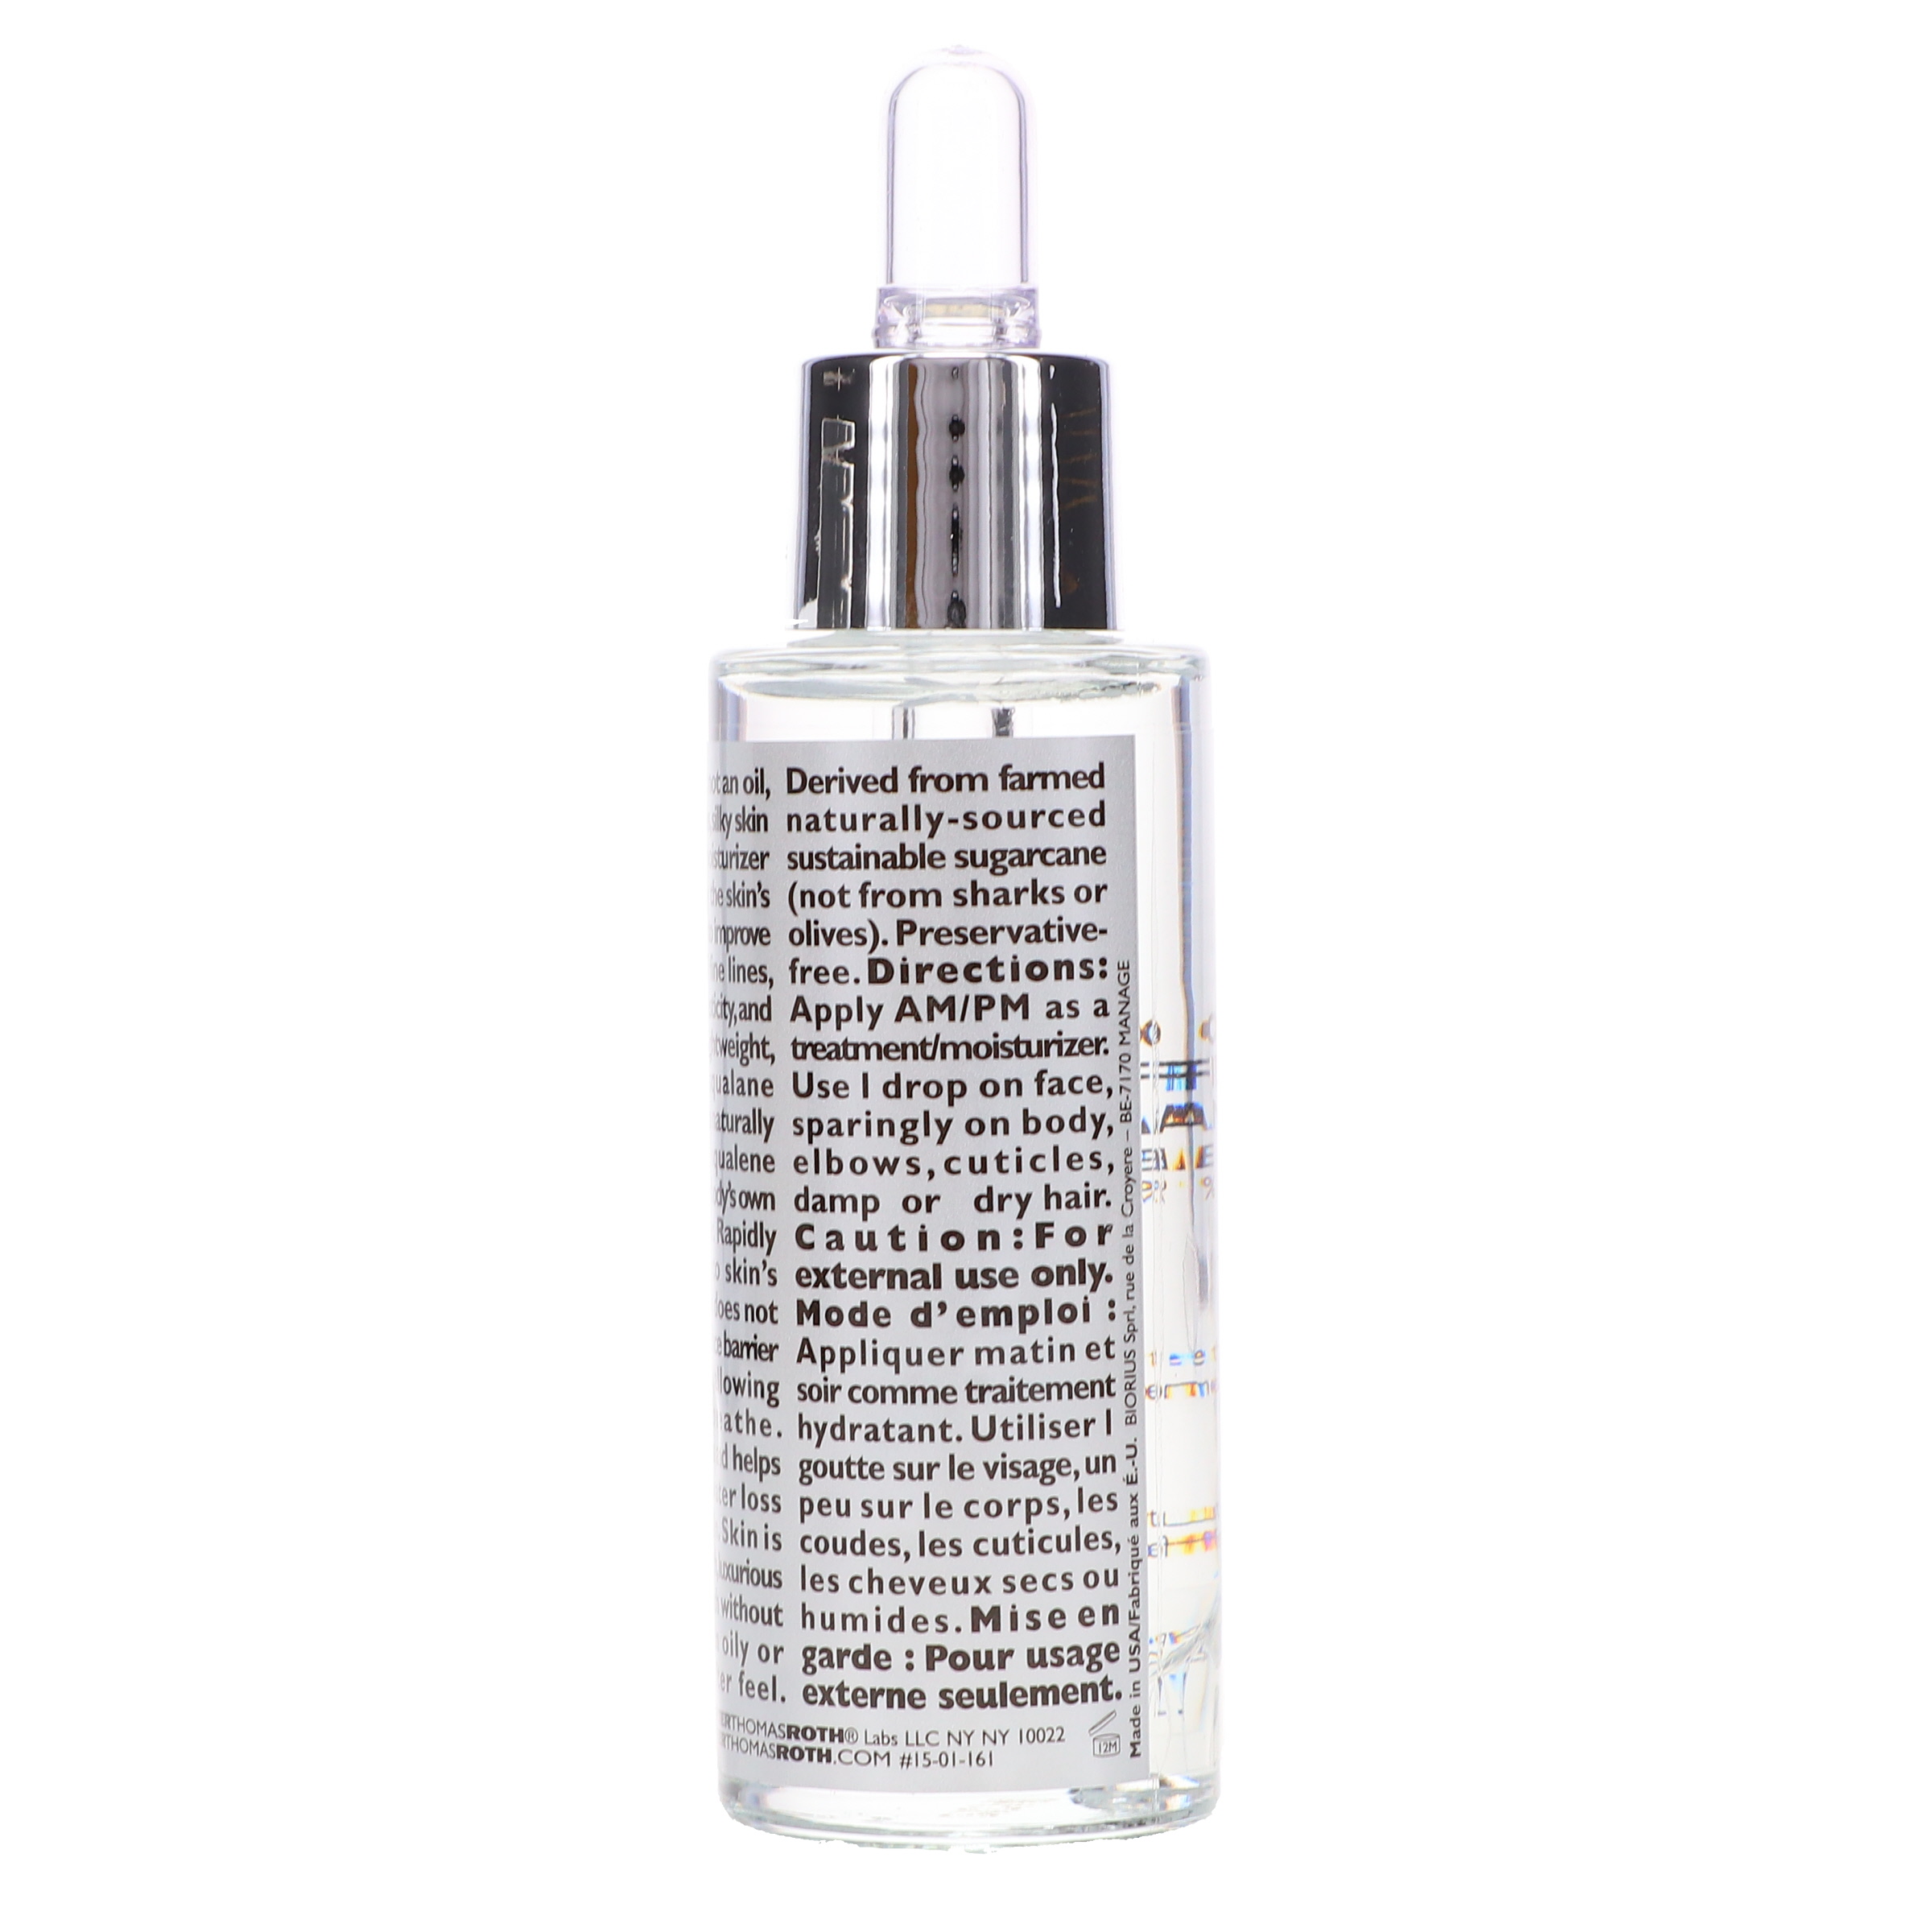 Peter Thomas Roth 100% Purified Squalane Oilless Oil 1 oz - image 5 of 8